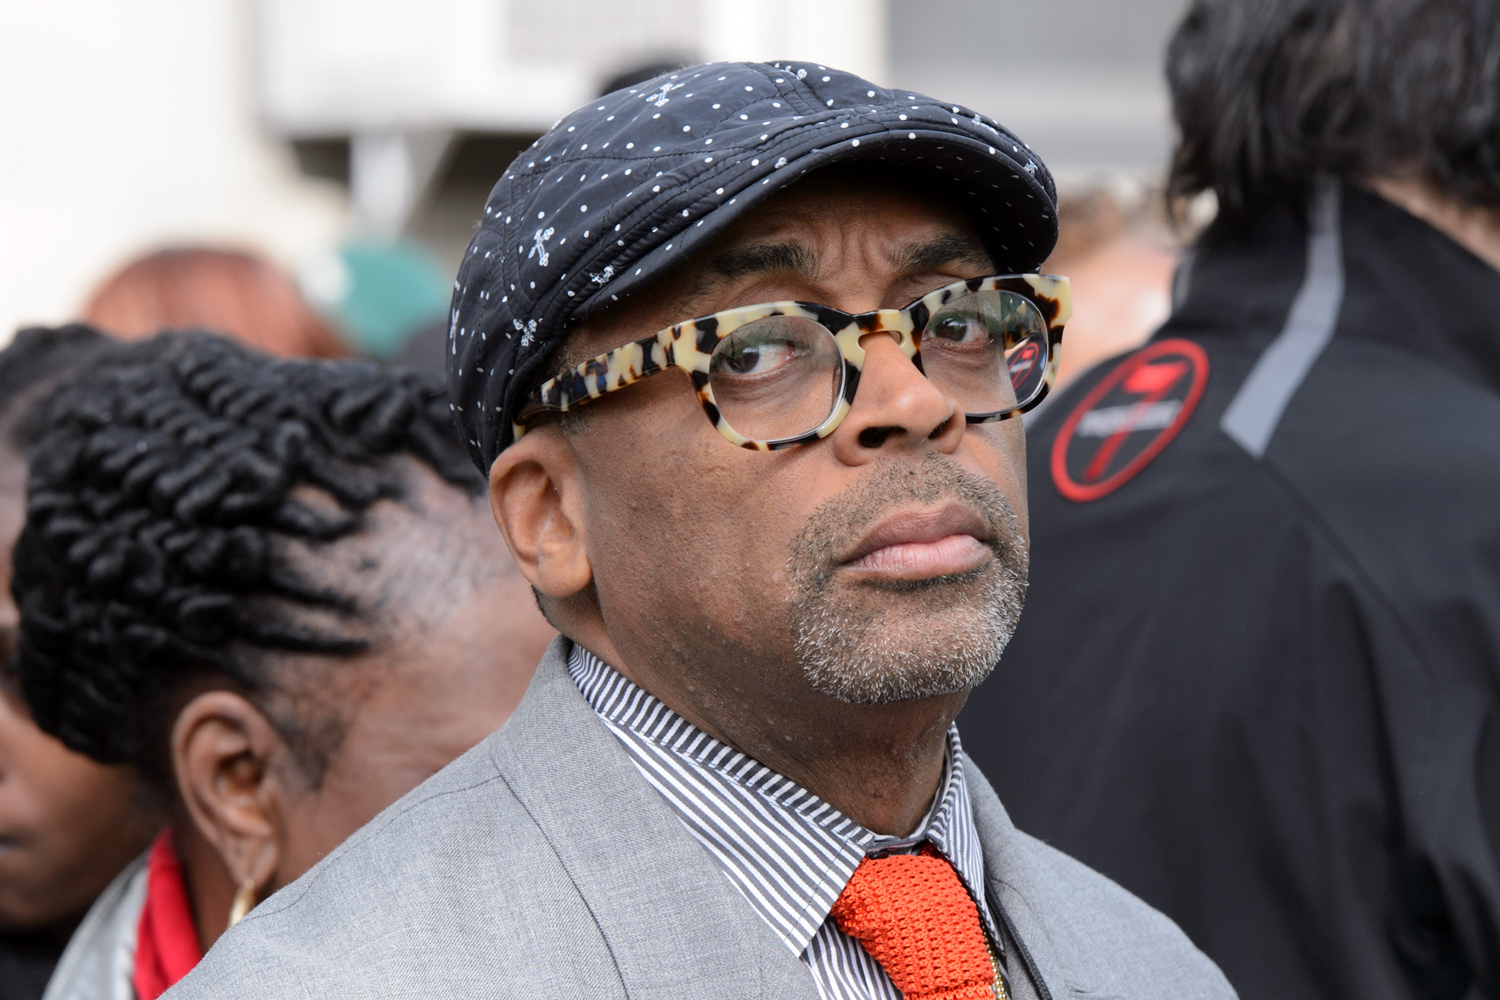 Spike Lee attends a press conference to discuss the upcoming film 'Chiraq' at St. Sabina Church on May 14, 2015 in Chicago, Illinois. (Daniel Boczarski — Getty Images)